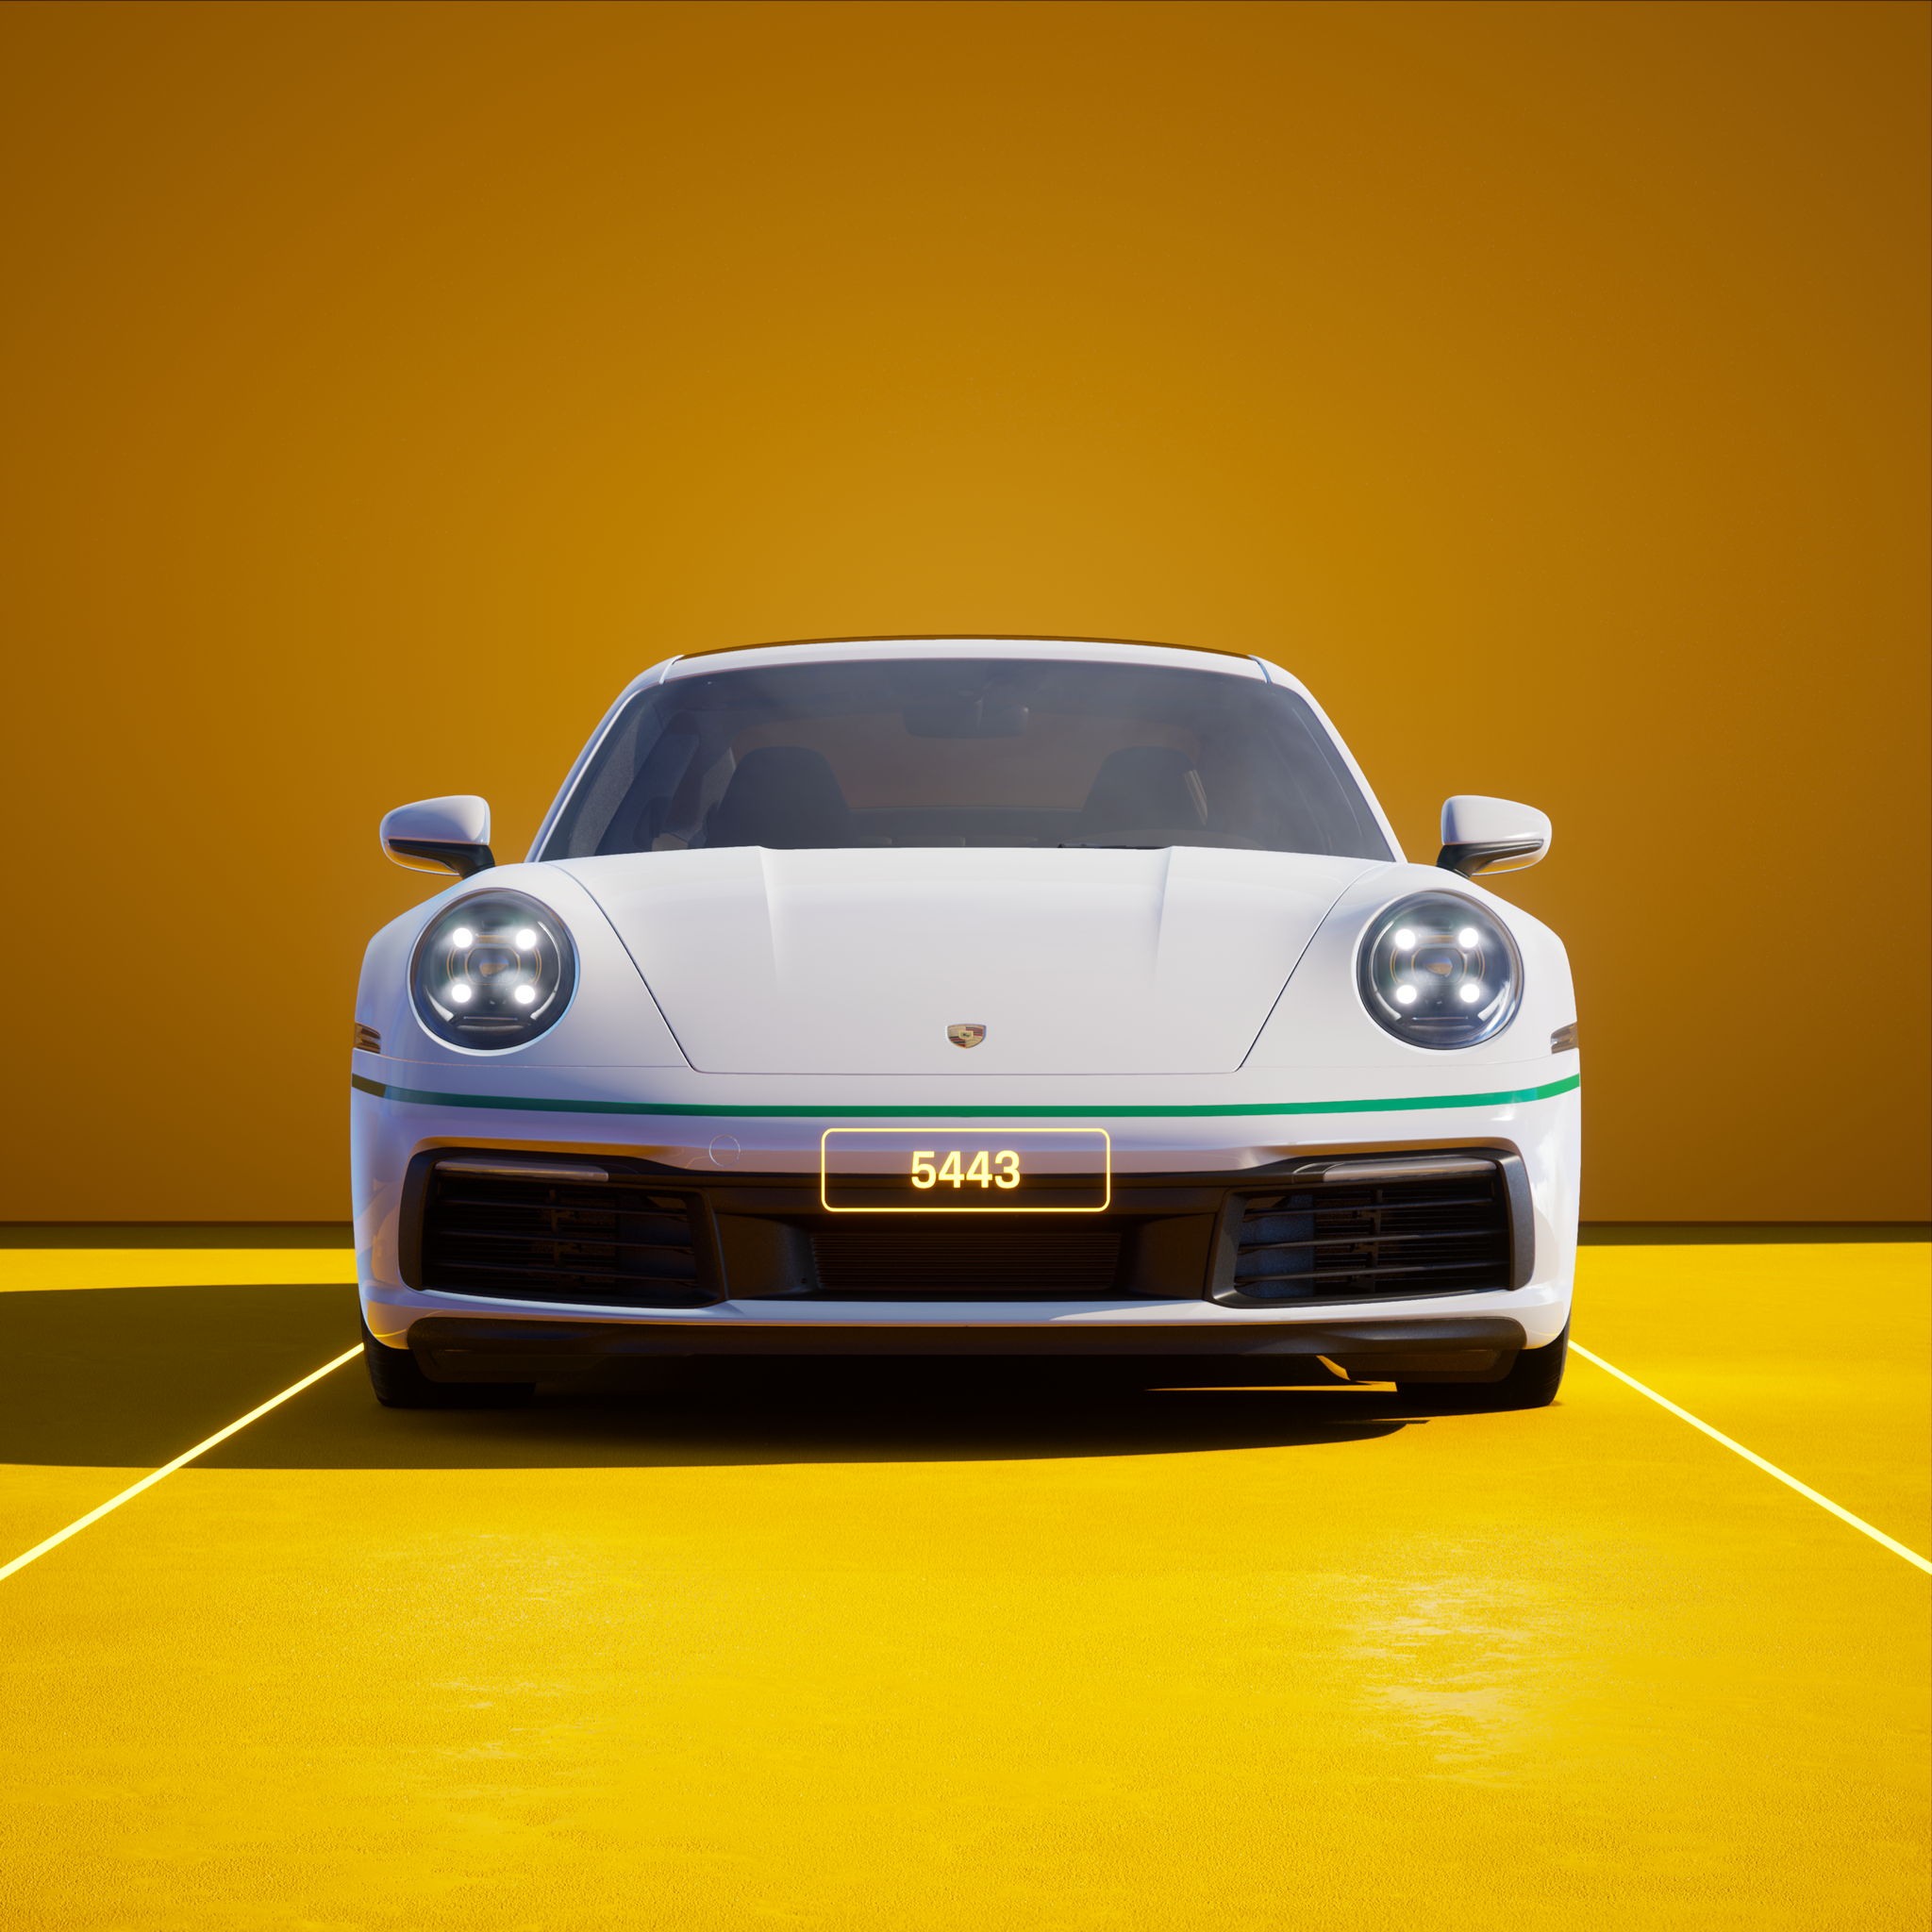 The PORSCHΞ 911 5443 image in phase